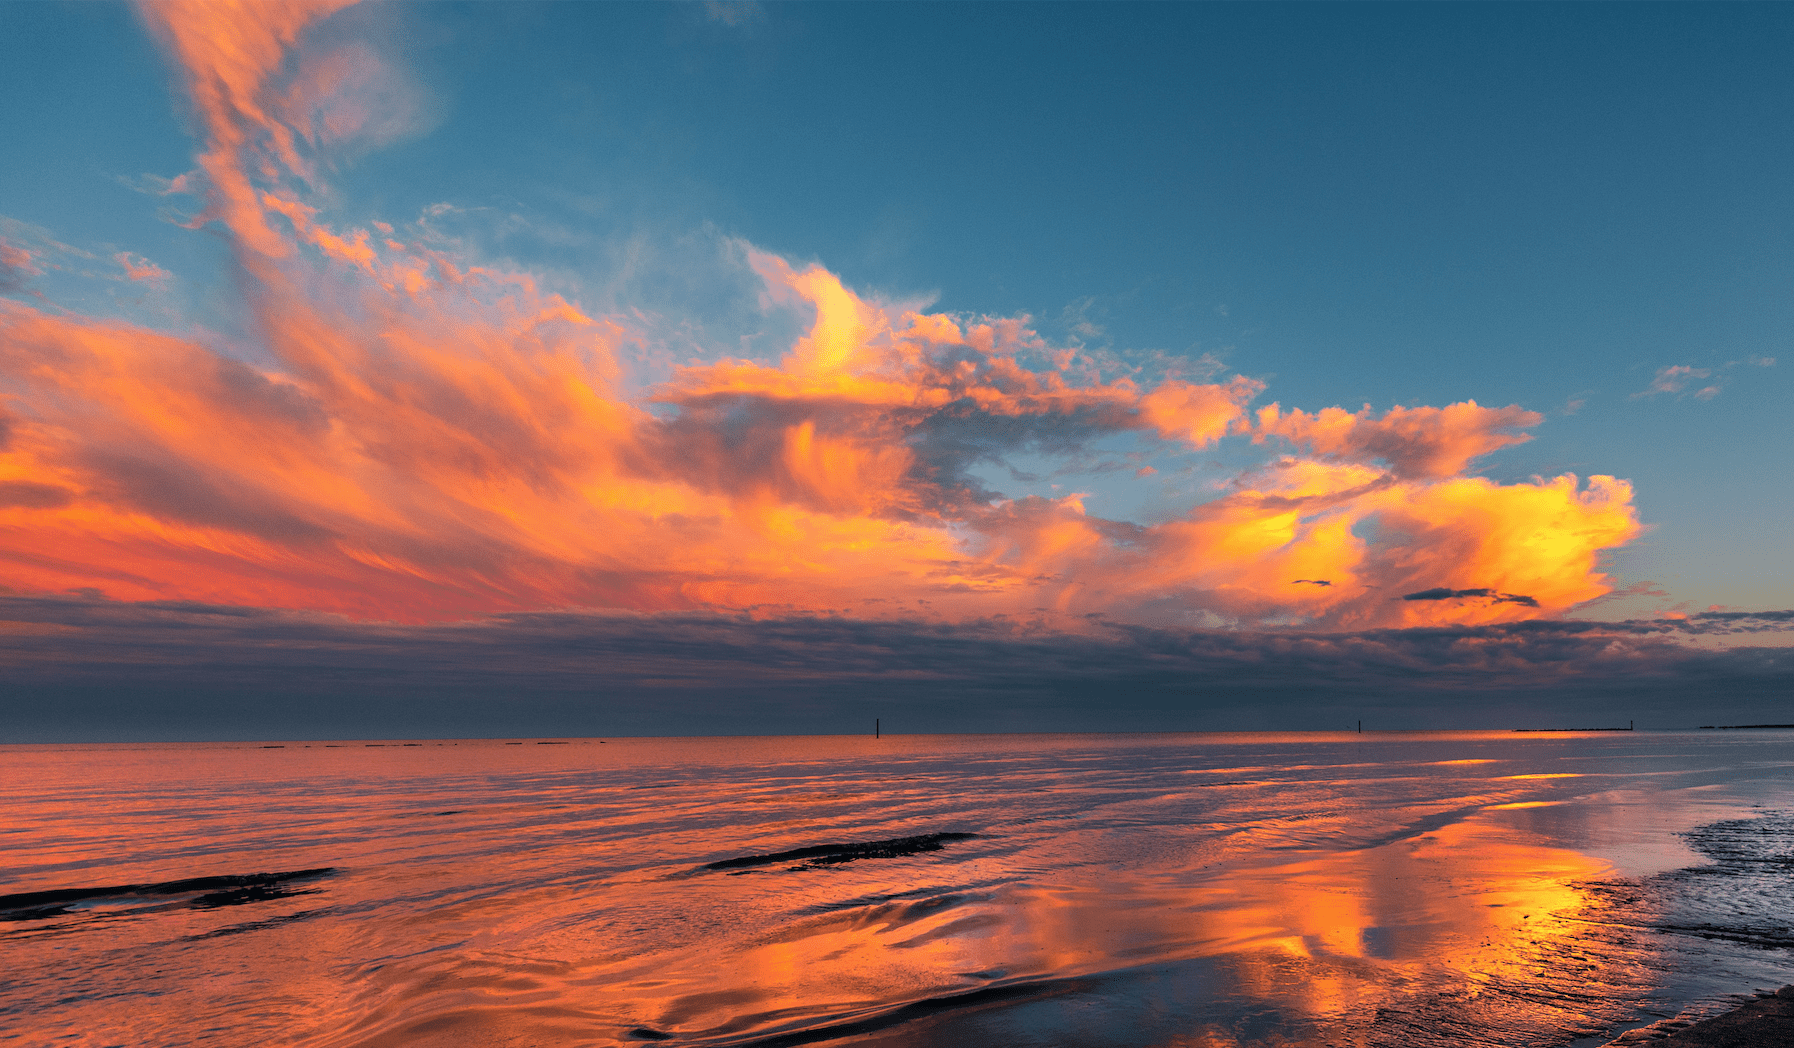 Fiery sunset clouds reflecting on tranquil seaside, painting the horizon with a palette of warm colors.